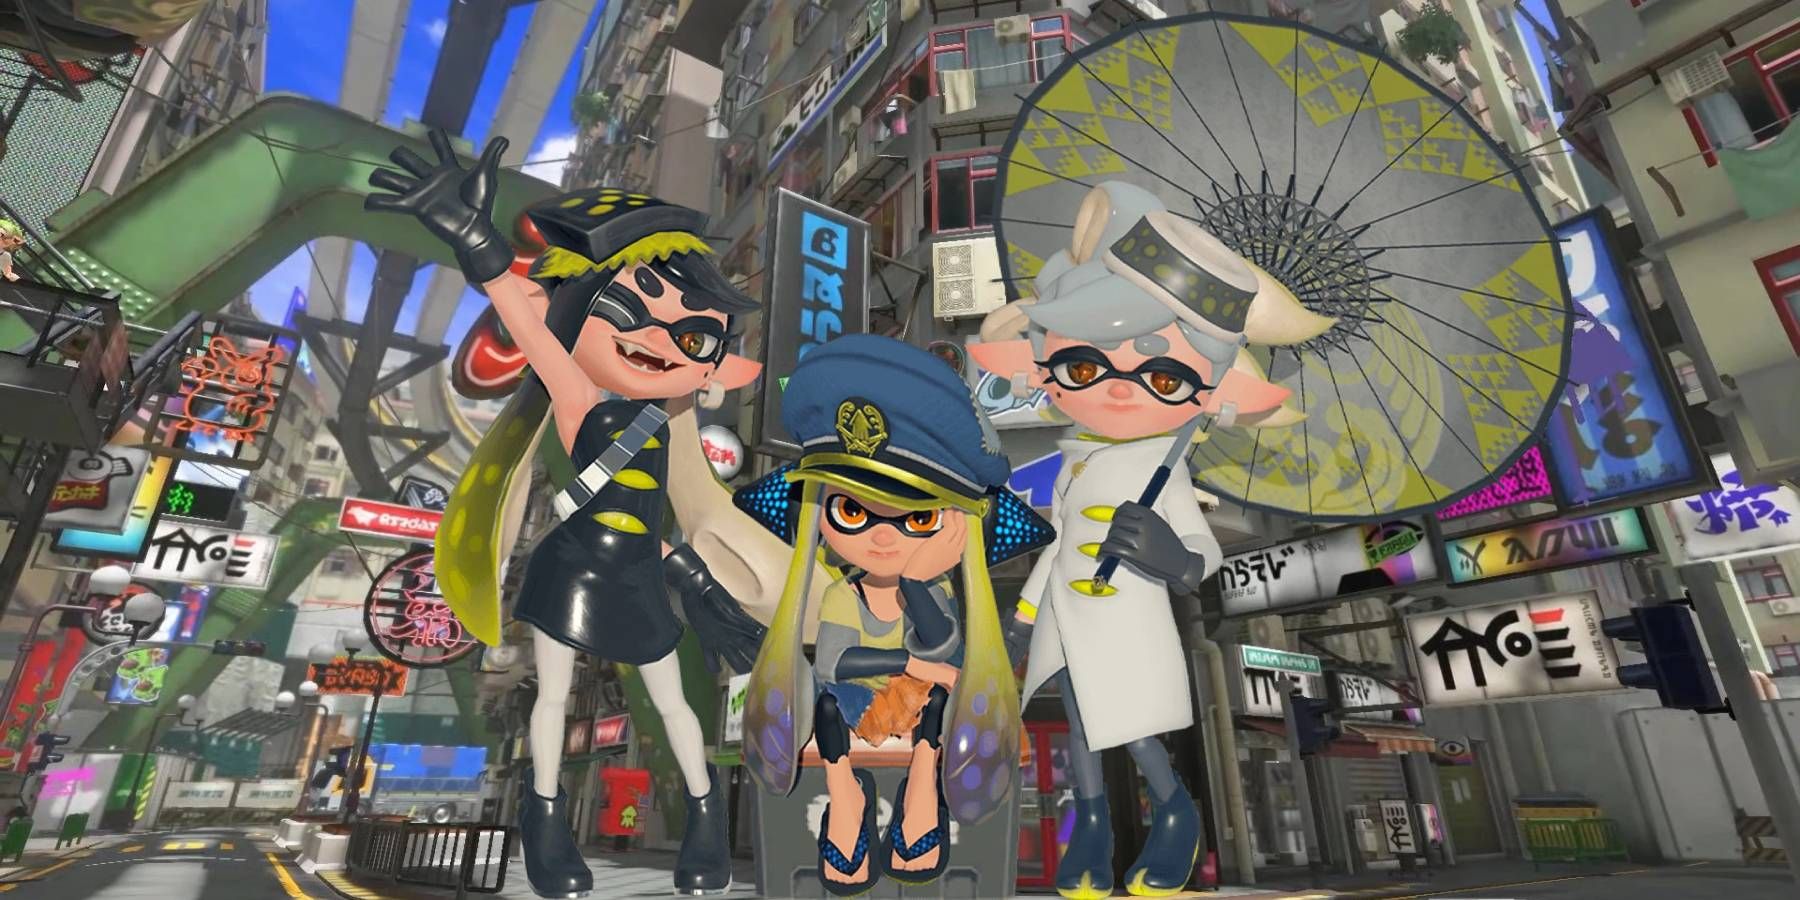 Agent 3 and the Squid Sisters in Splatsville from Splatoon 3